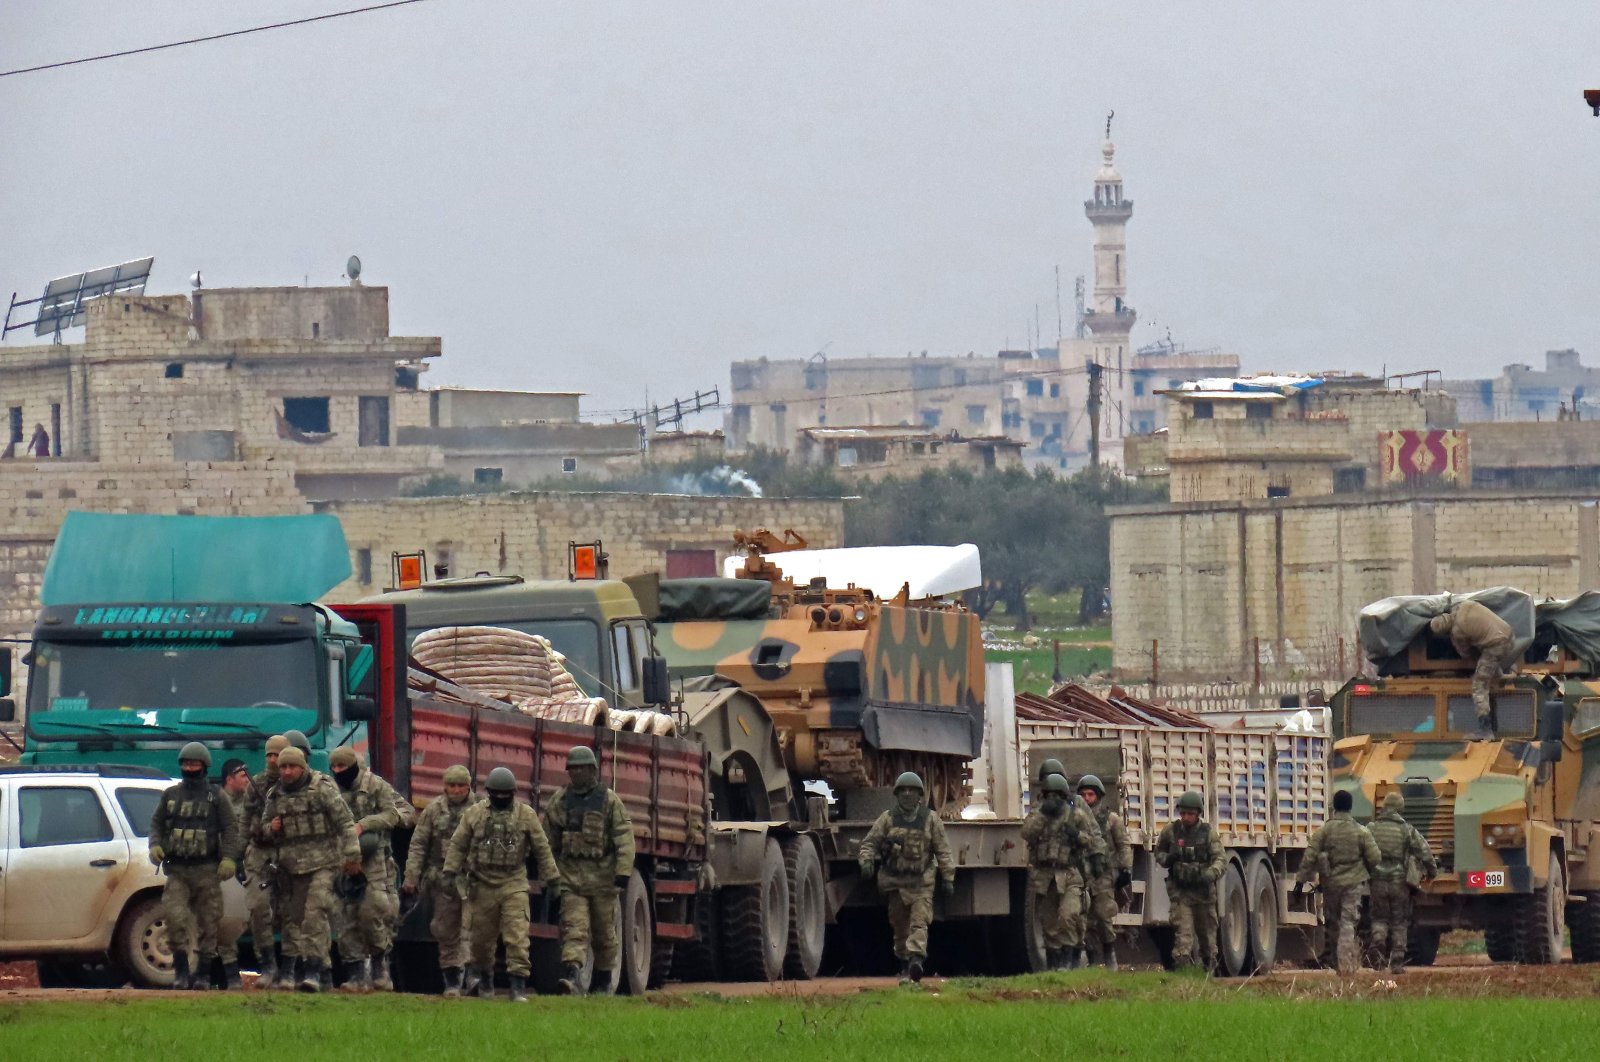 Turkish military vehicles are pictured in the town of Binnish in Syria’s northwestern province of Idlib, near the Syria-Turkey border on Feb. 12, 2020. (AFP Photo)